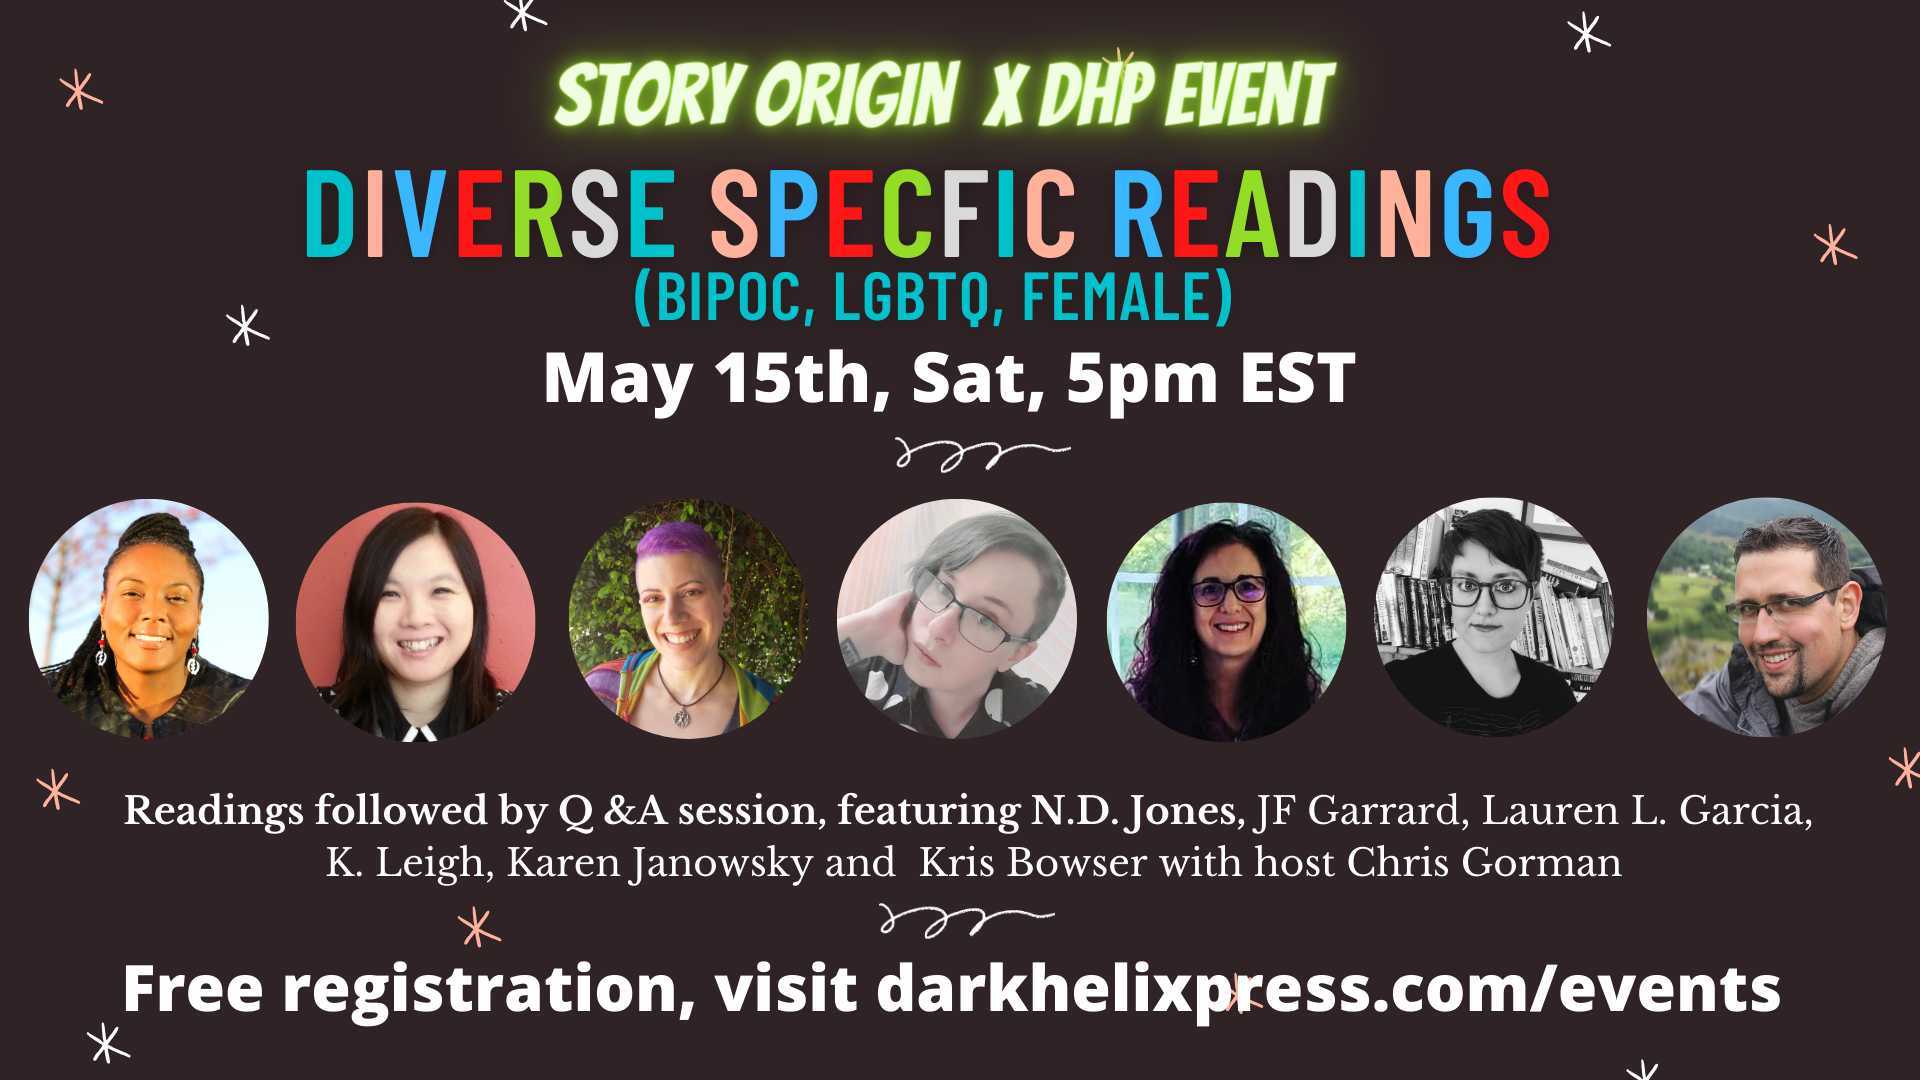 Diverse Speculative Fiction Reading Event